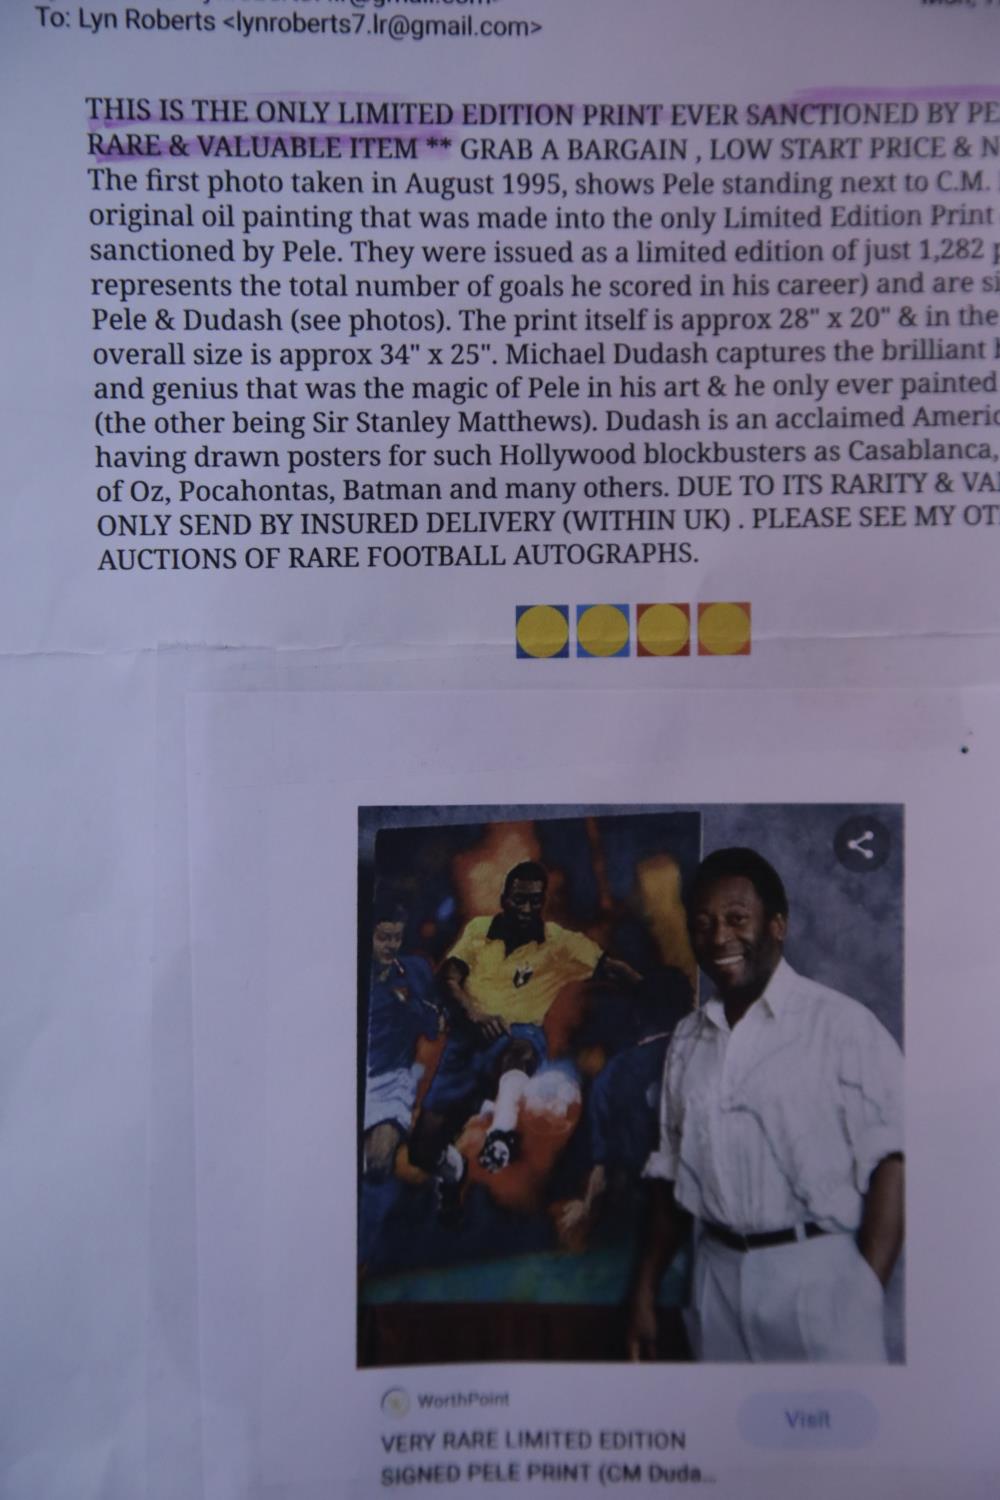 Rare limited edition print of Pele by artist CM Dudash, one of 1282 prints sanctioned by Pele to